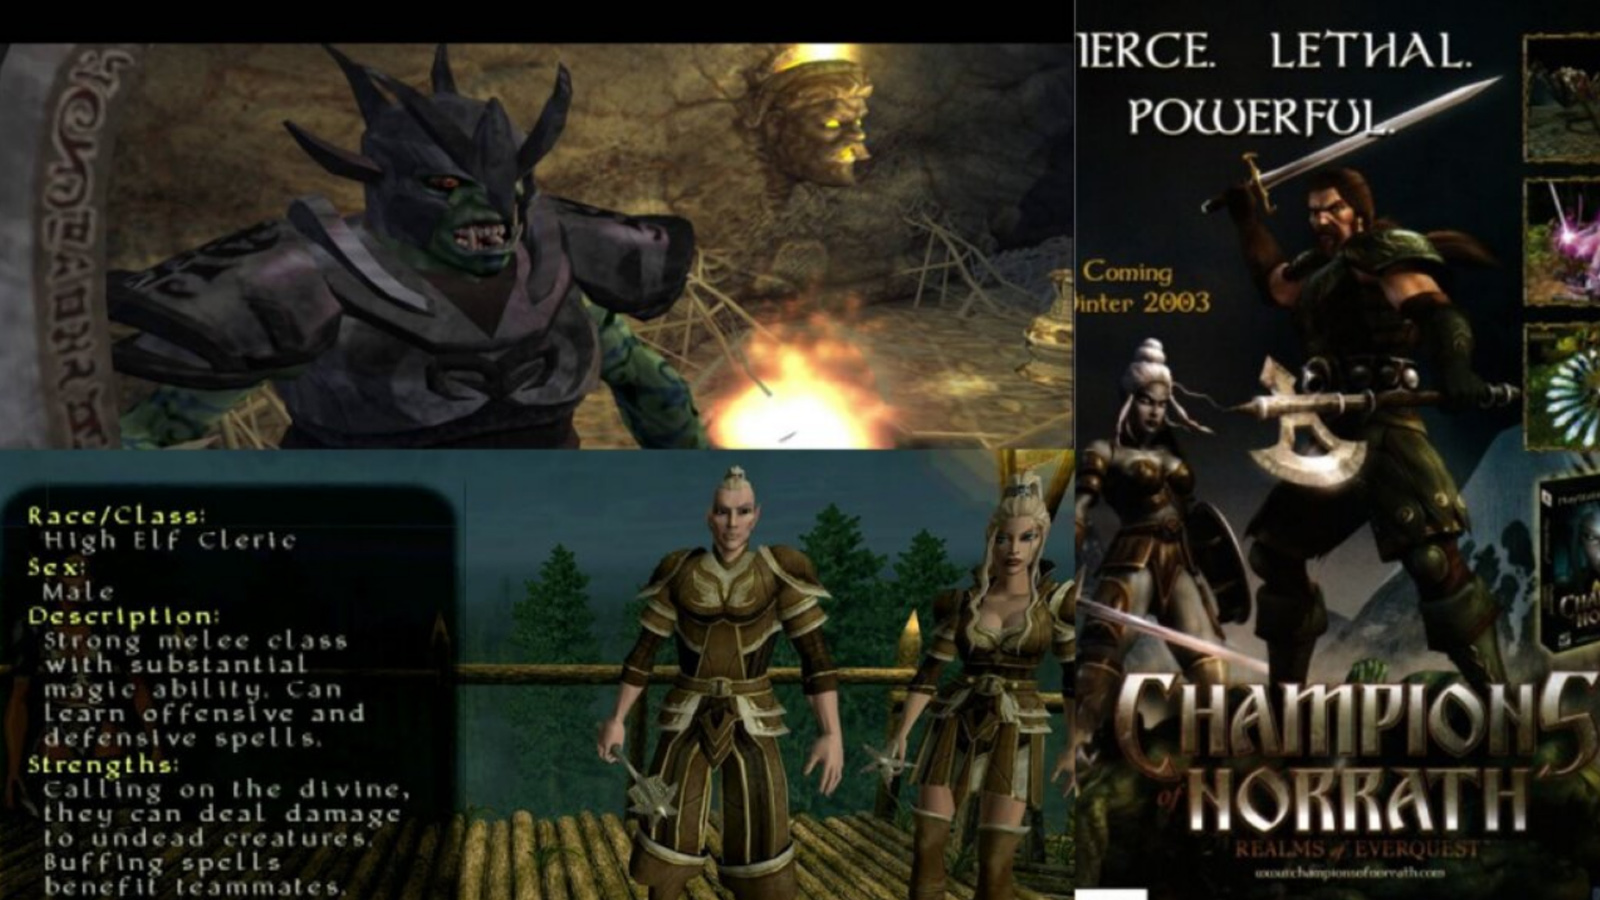 Find detailed information about Champions of Norrath